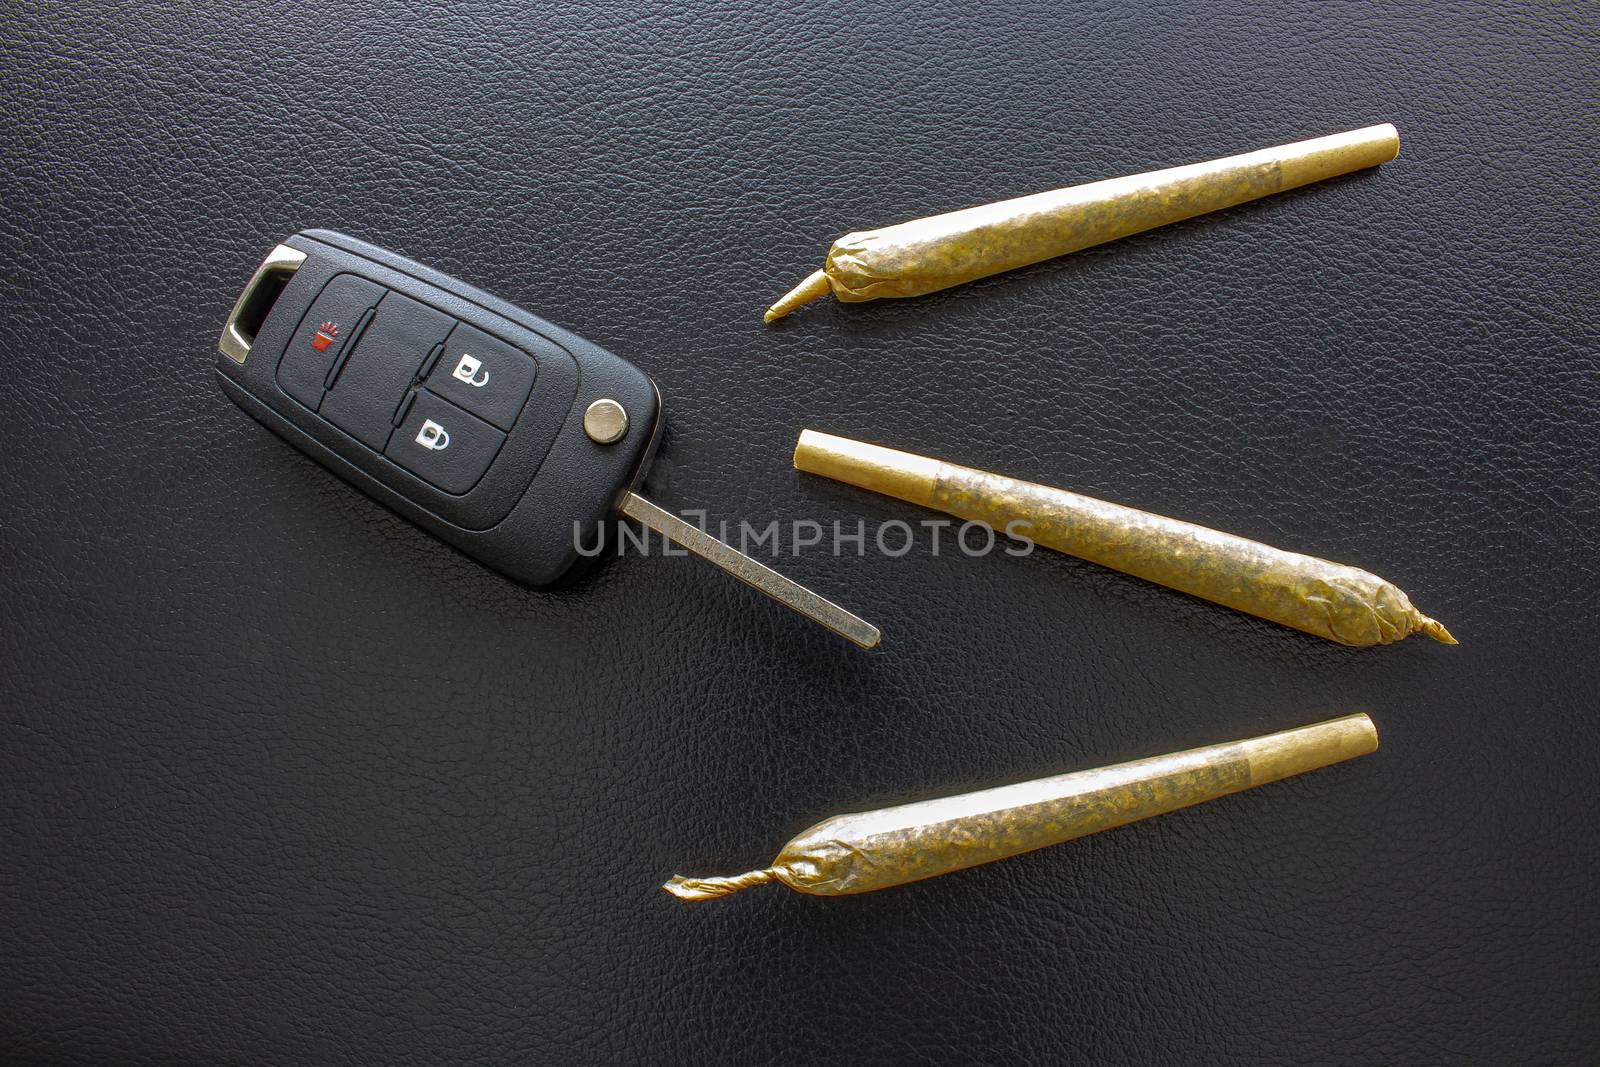 Cannabis Joints Cigarettes with car key on the side on a leather black texture. Concept driving high. Drug-impaired driving is dangerous and against the law by oasisamuel